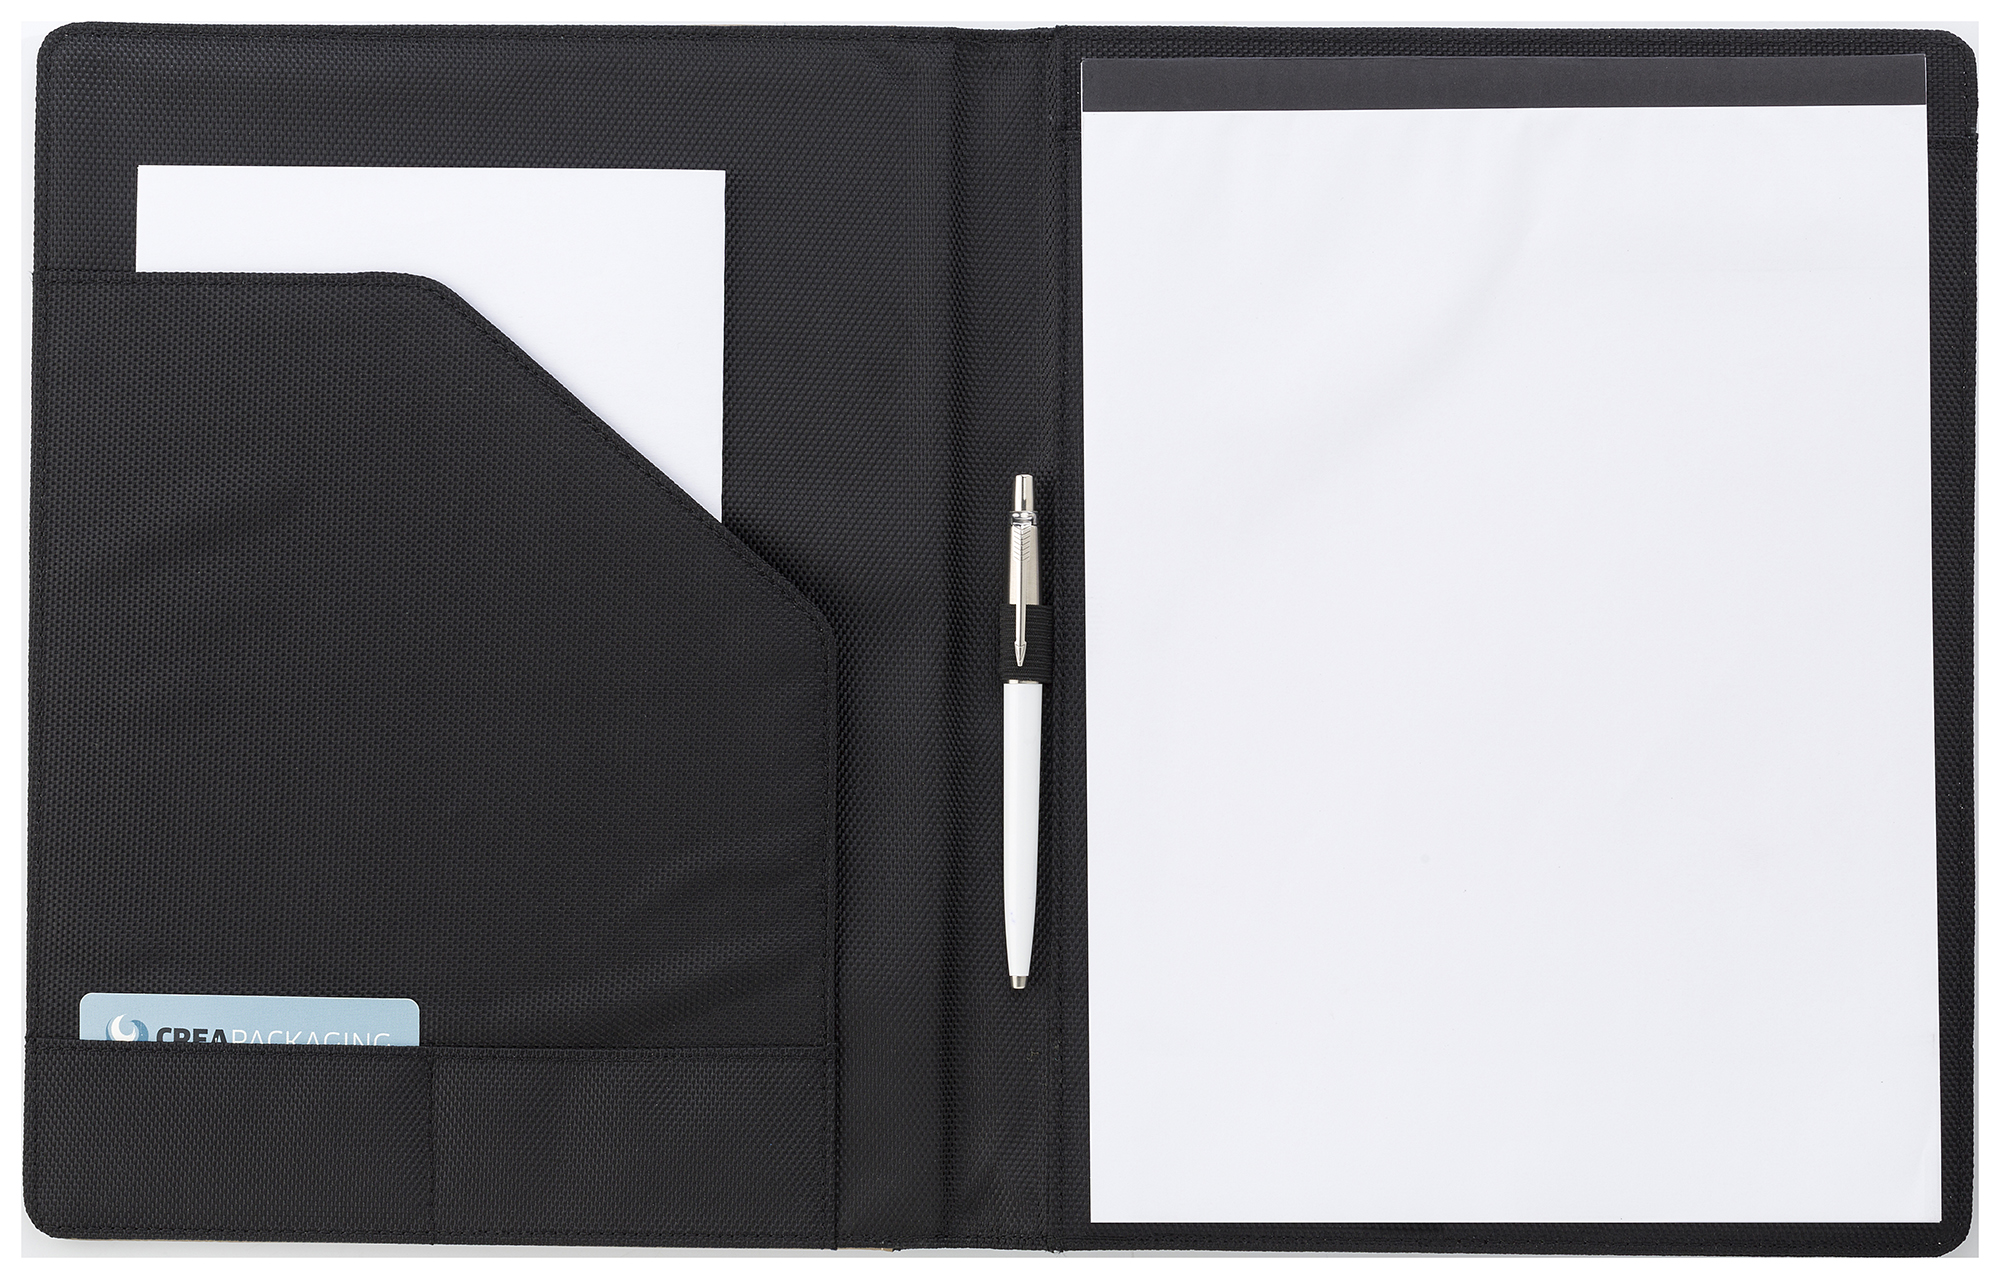 Branded A4 Pad folio with PU cover, a large internal pocket, one smaller sewed on pocket, an elasticated pen loop, and a 50 page lines note pad. 